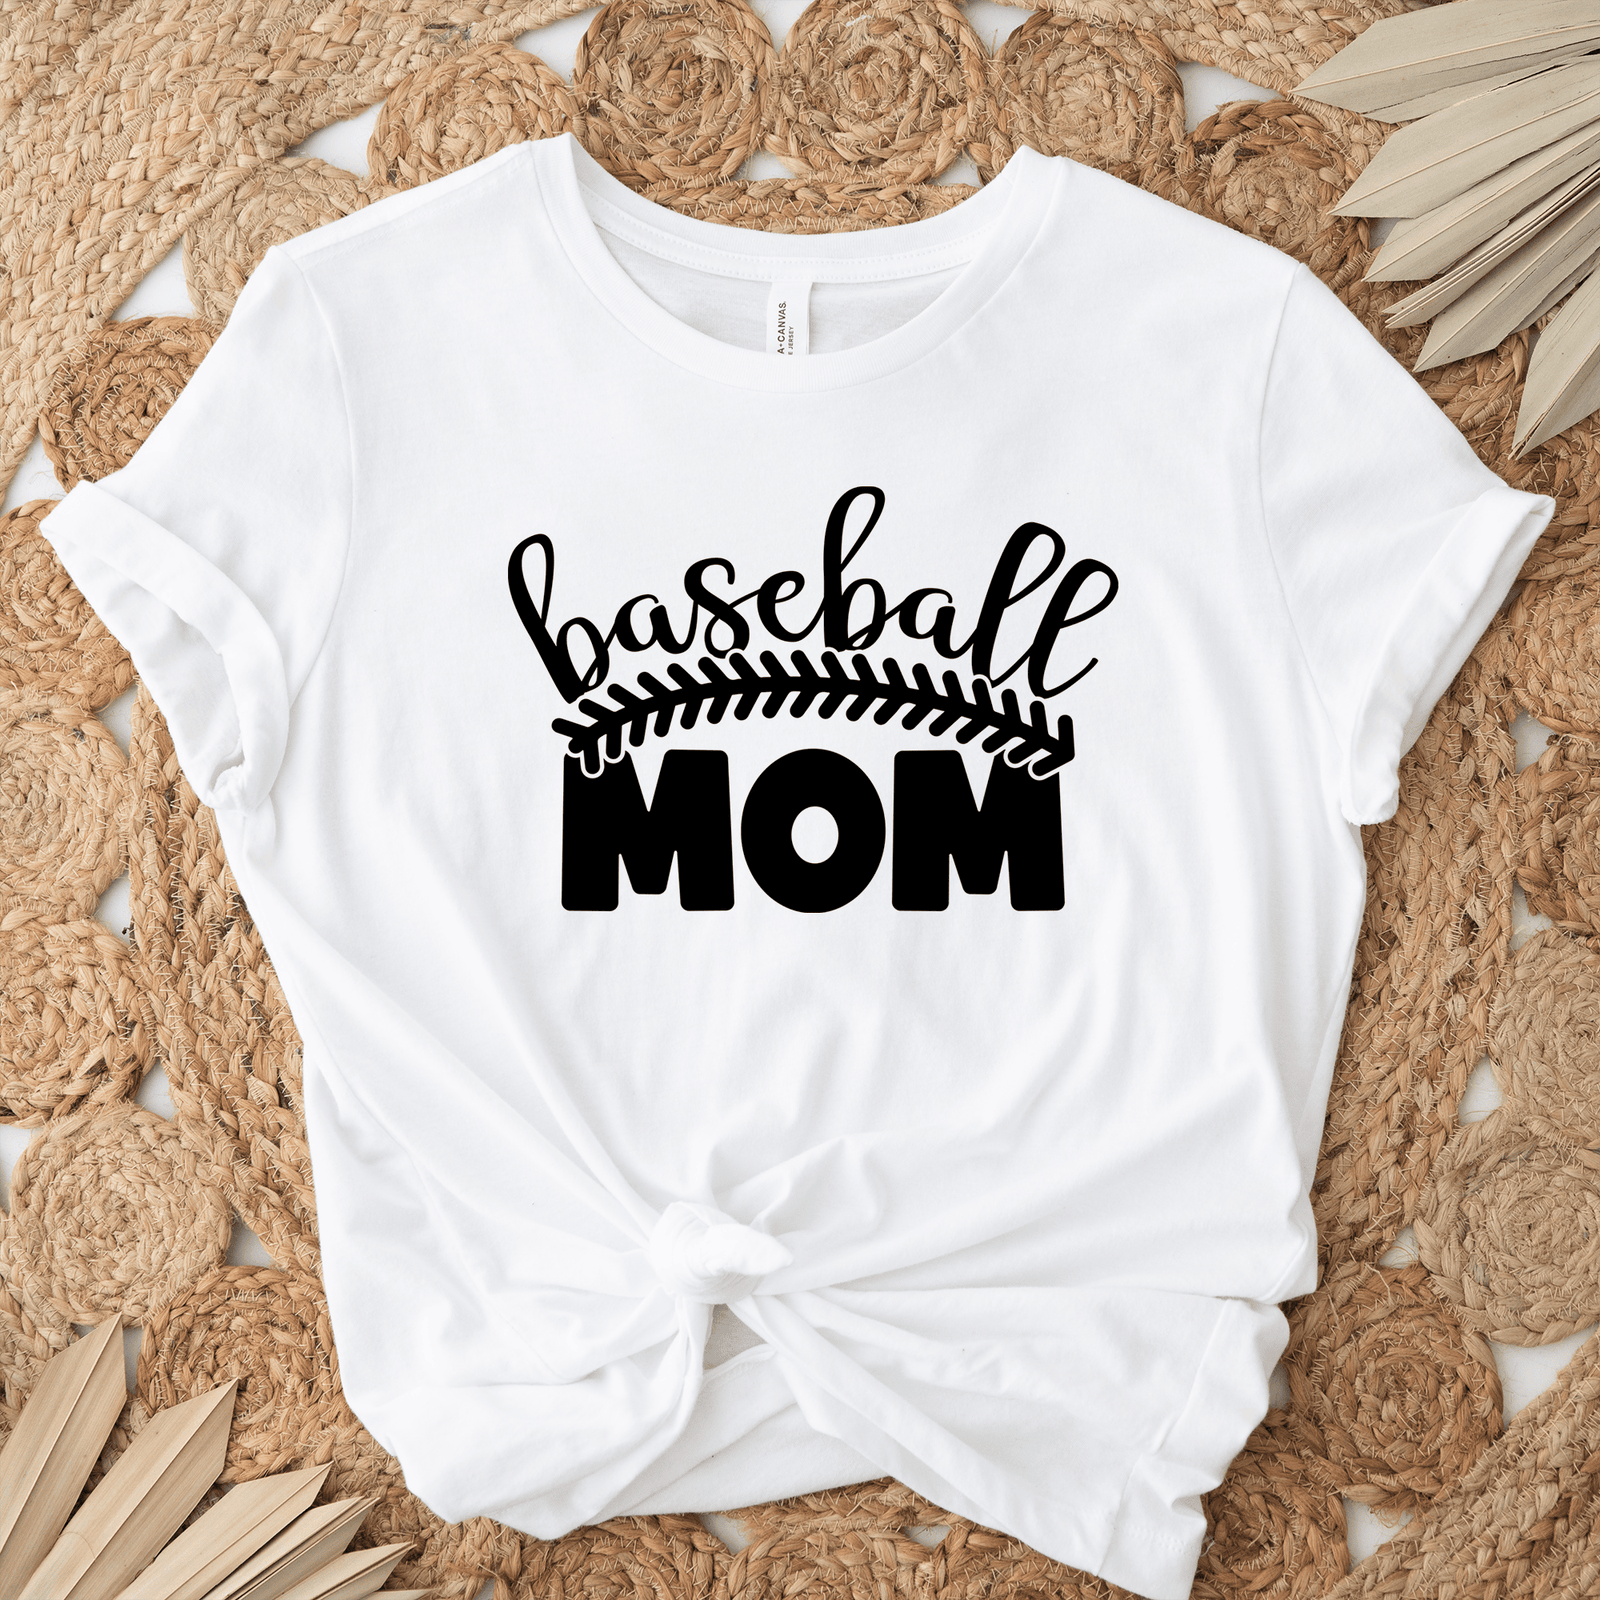 Womens White T Shirt with Stitched-Baseball-Mom design